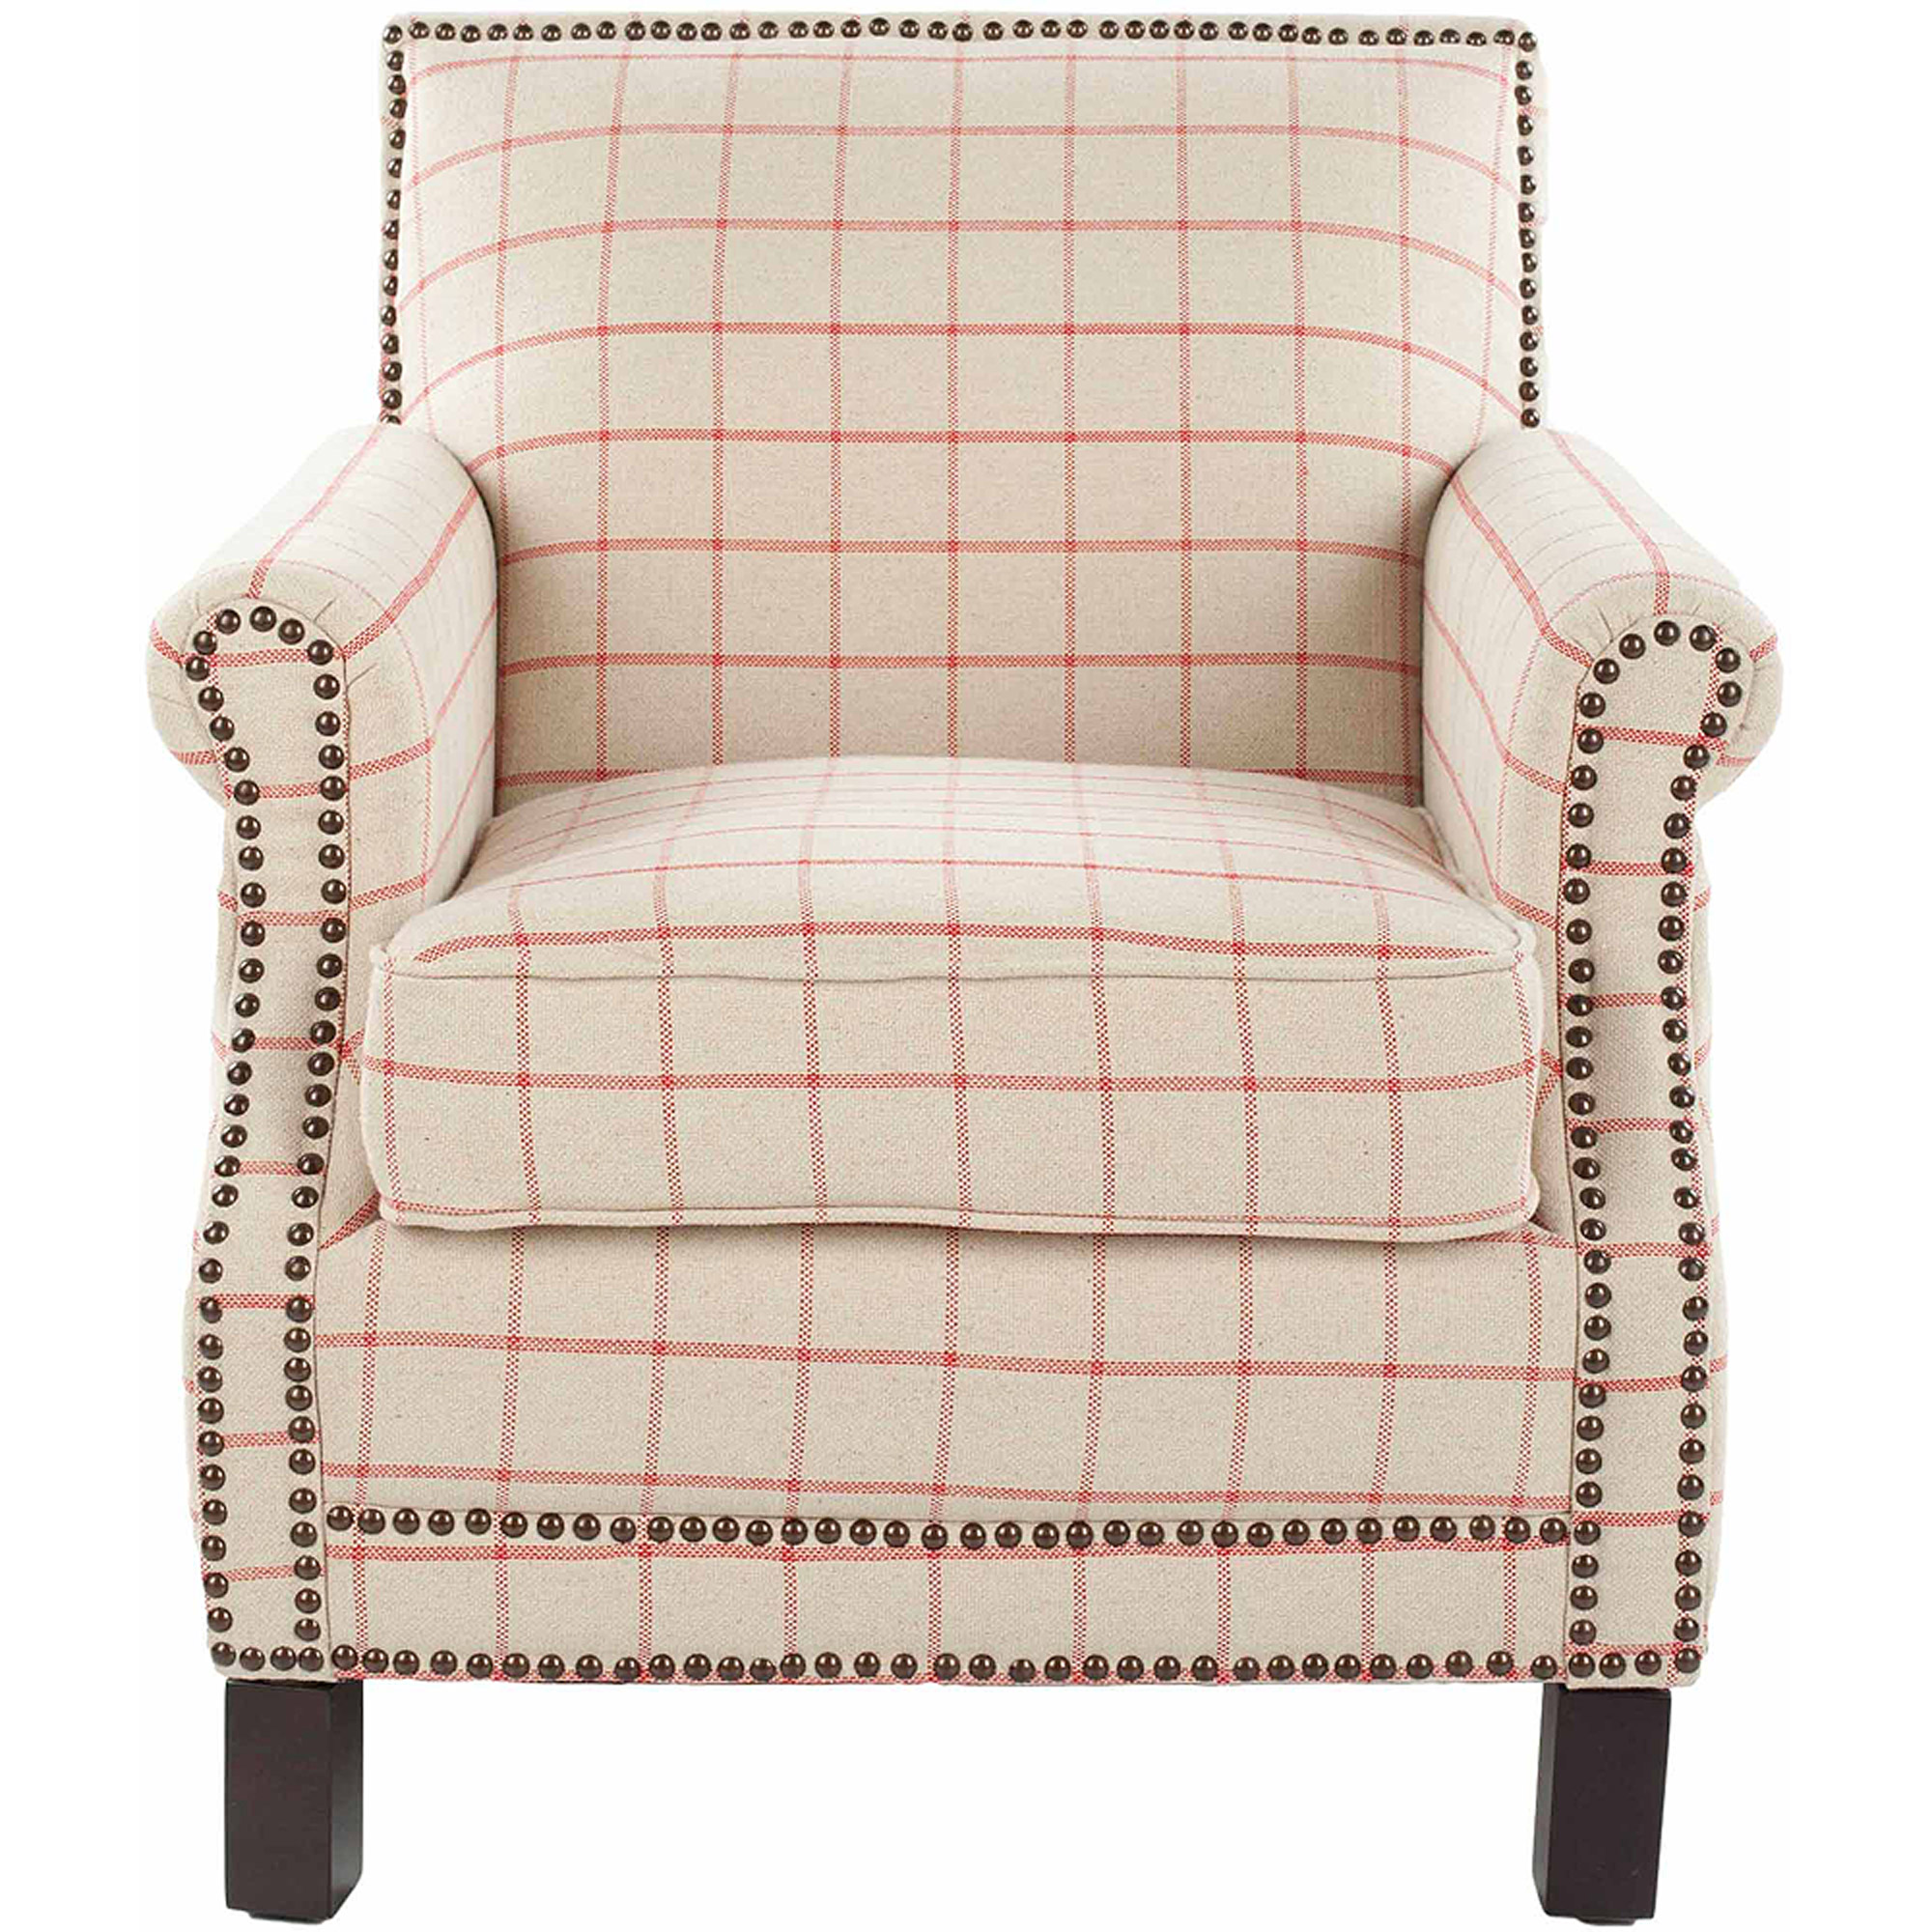 SAFAVIEH Easton Rustic Glam Upholstered Club Chair w/ Nailheads, Taupe/Orange - image 2 of 4